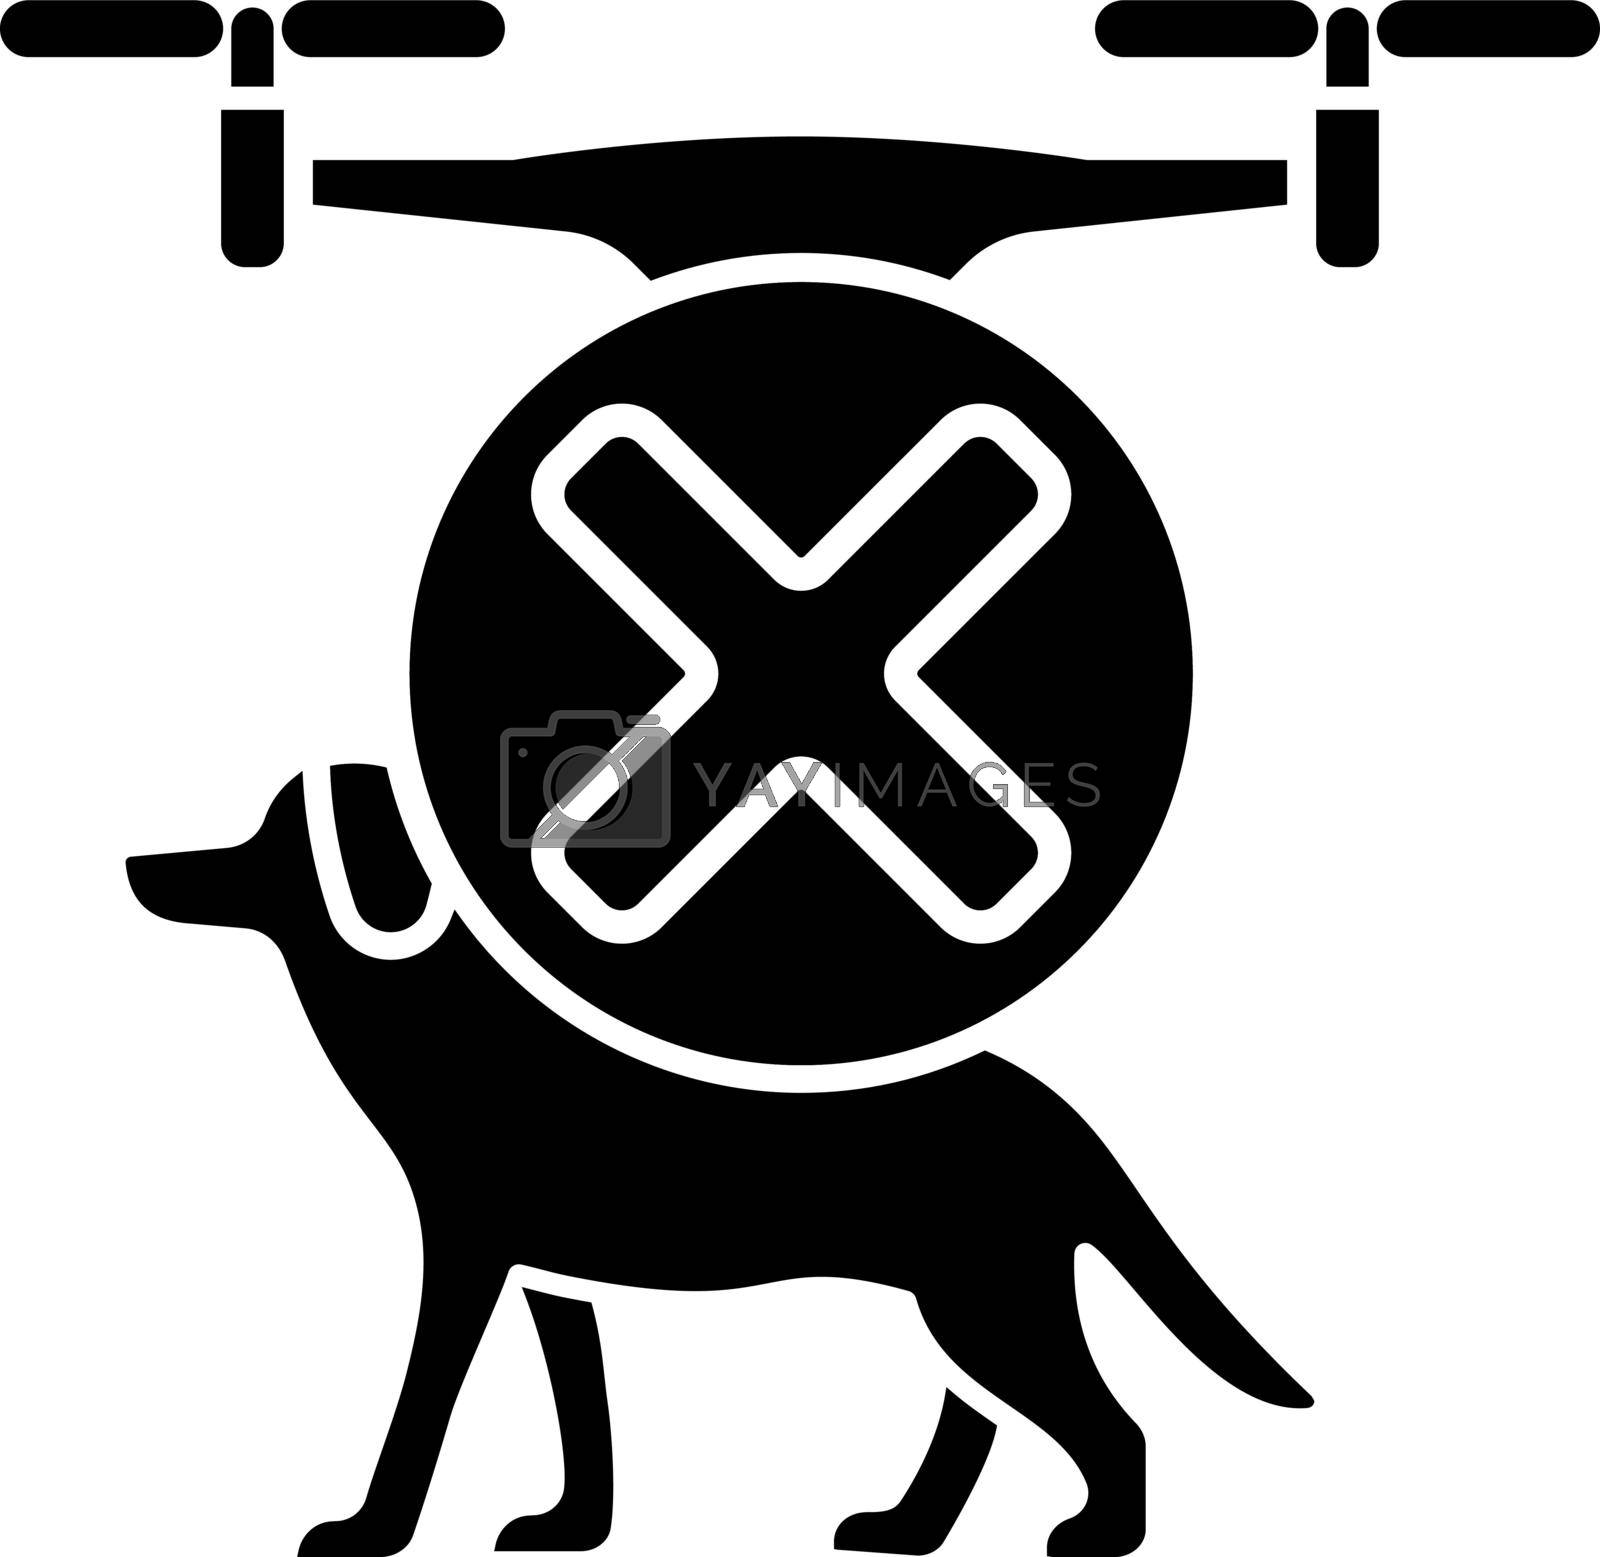 Royalty free image of Dont fly above animals black glyph manual label icon by bsd